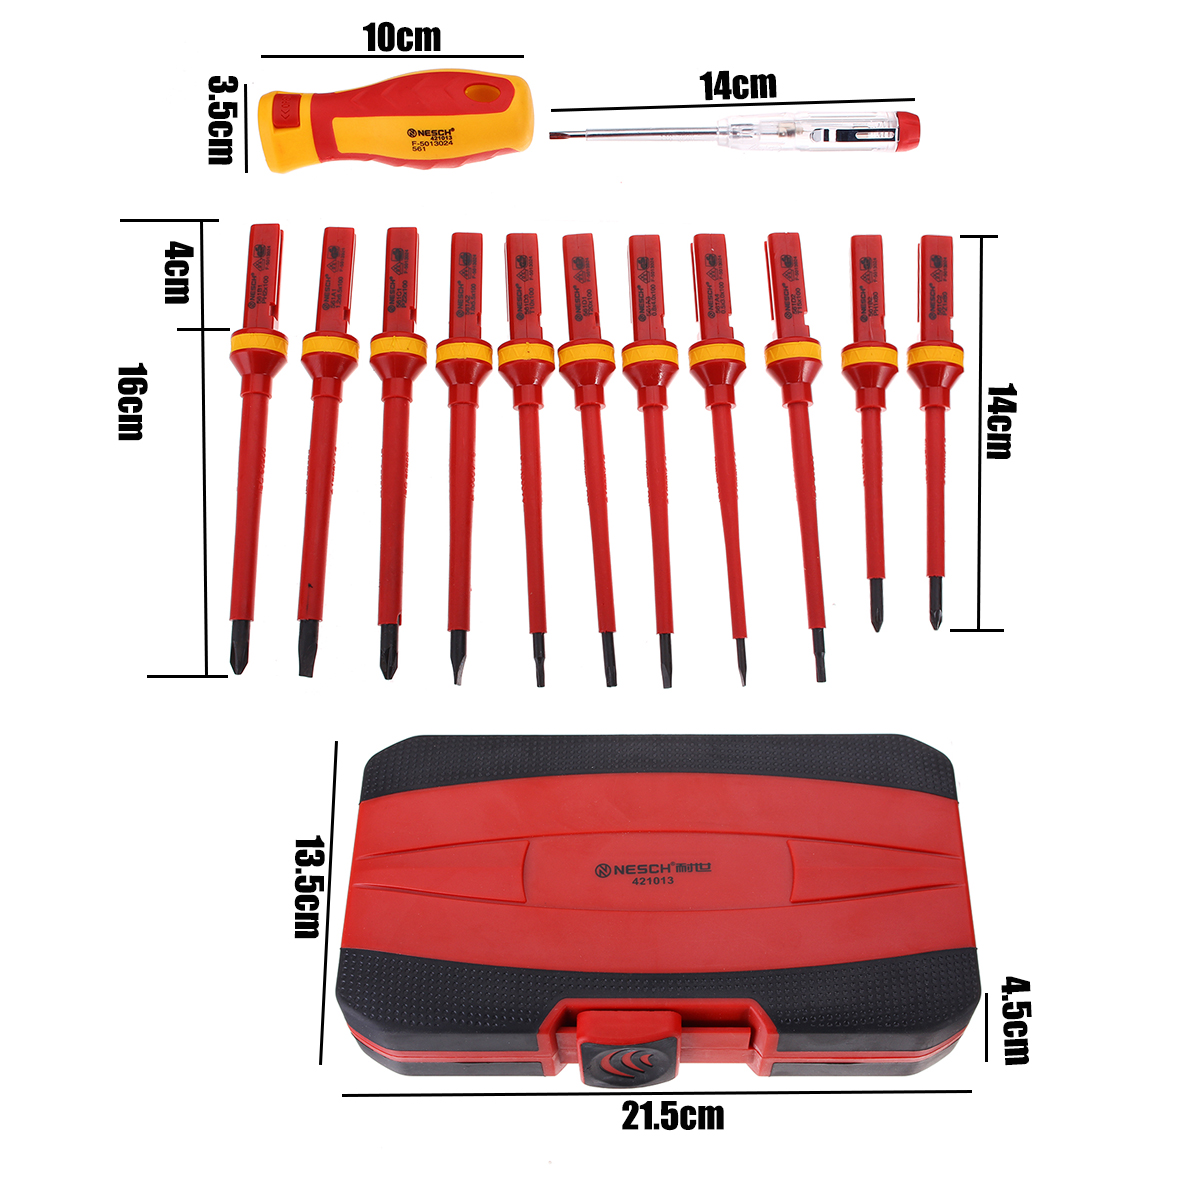 13Pcs 1000V Electronic Insulated Screwdriver Set Phillips Slotted Torx CR-V Screwdriver Repair Tools 66